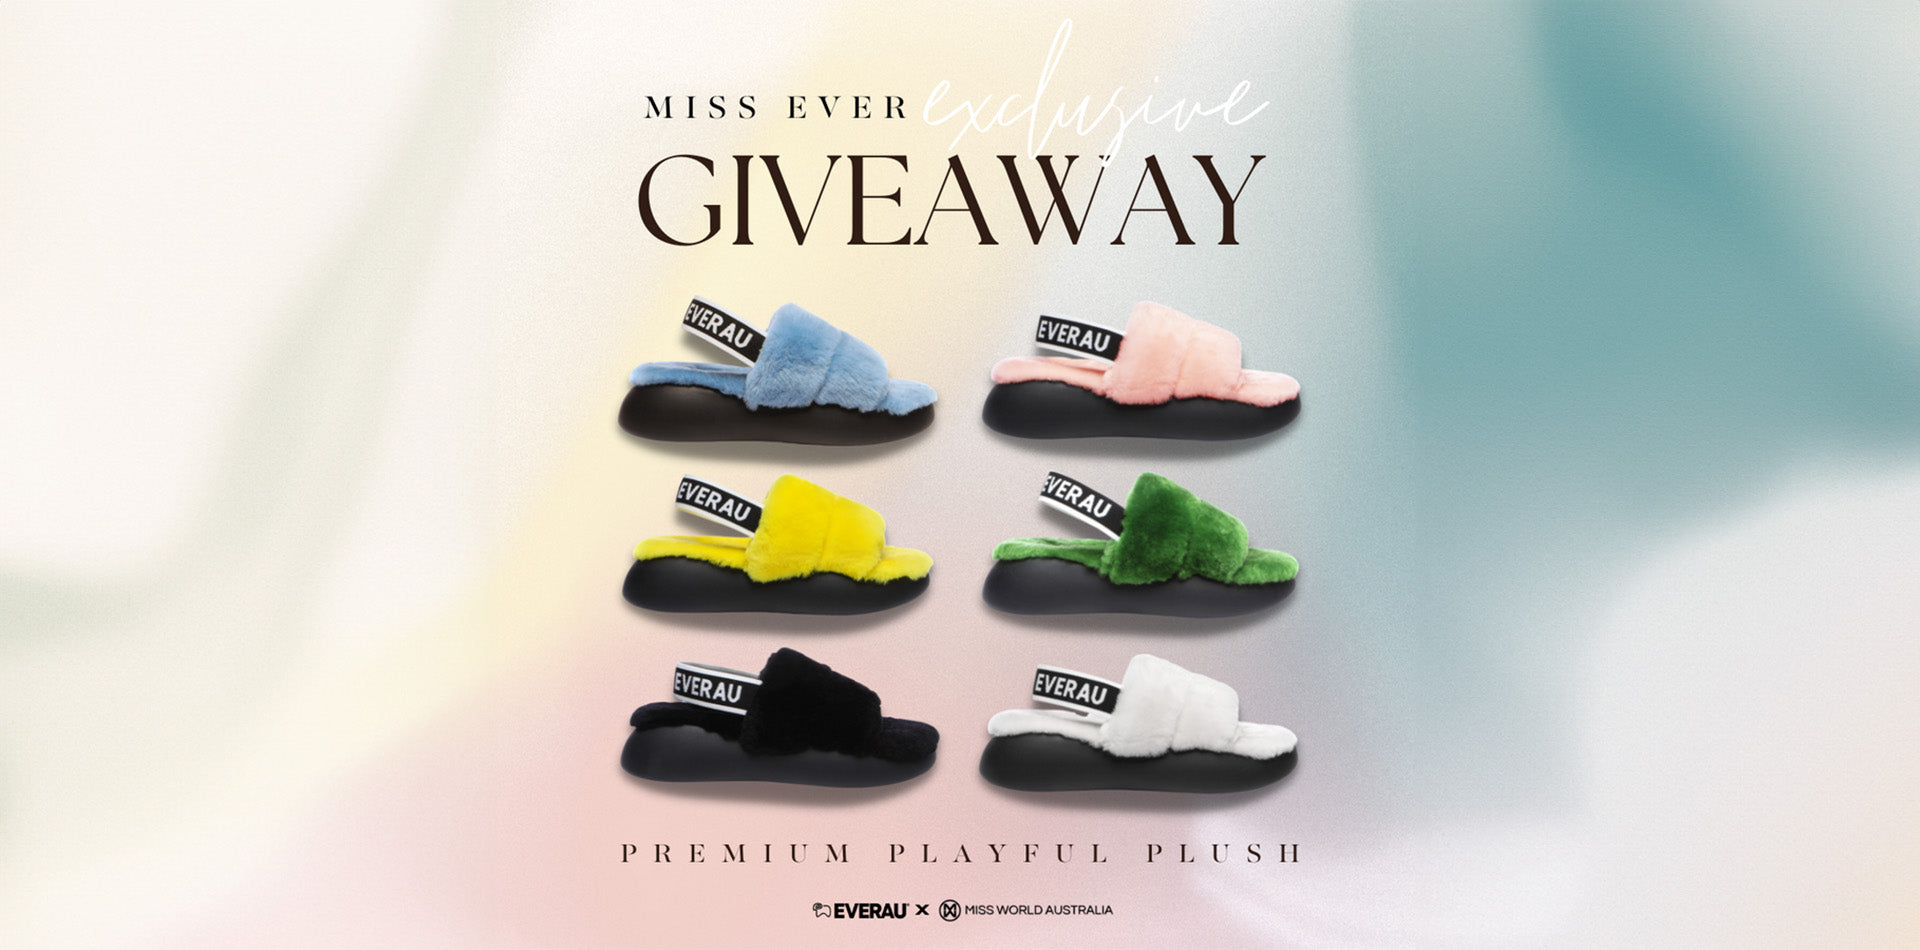 MISS EVER EXCLUSIVE GIVEAWAY